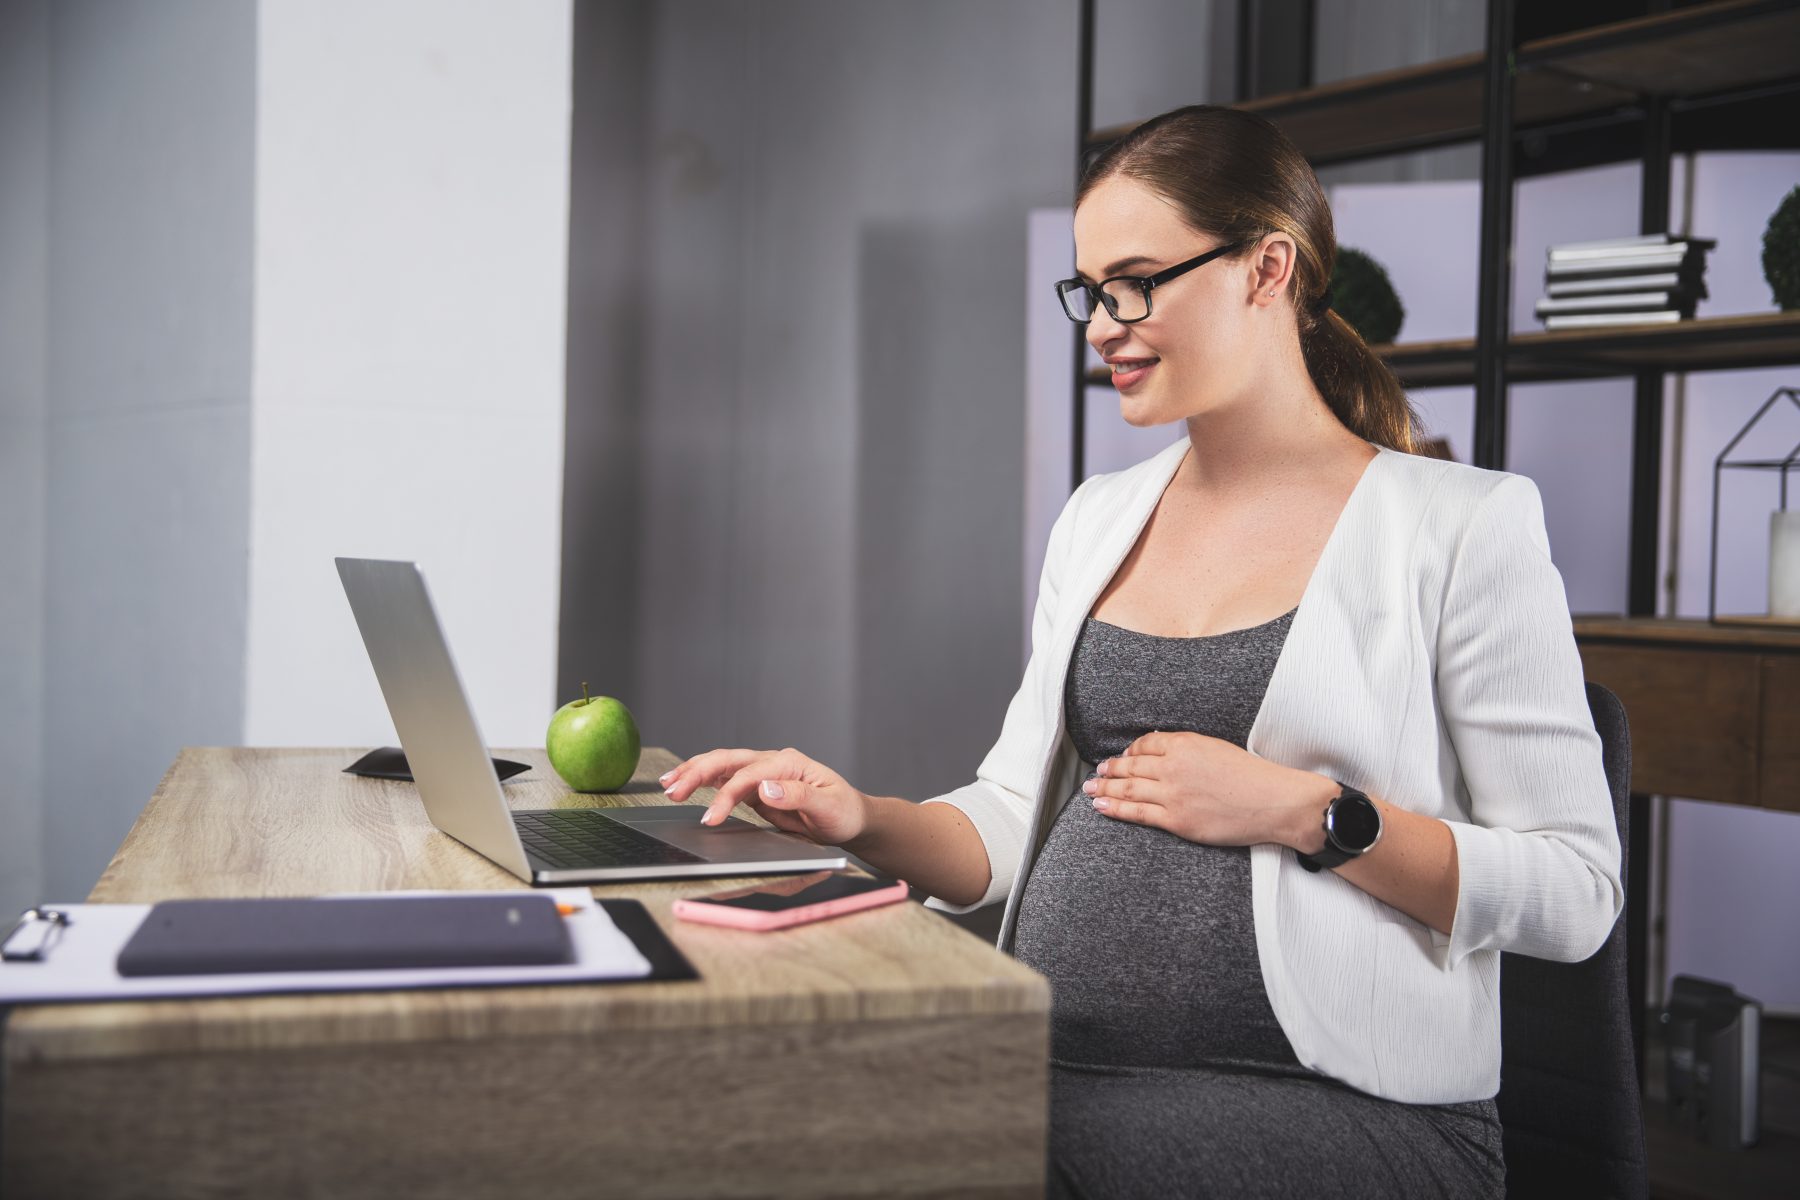 Pregnancy and Parental Leave in the Time of COVID-19